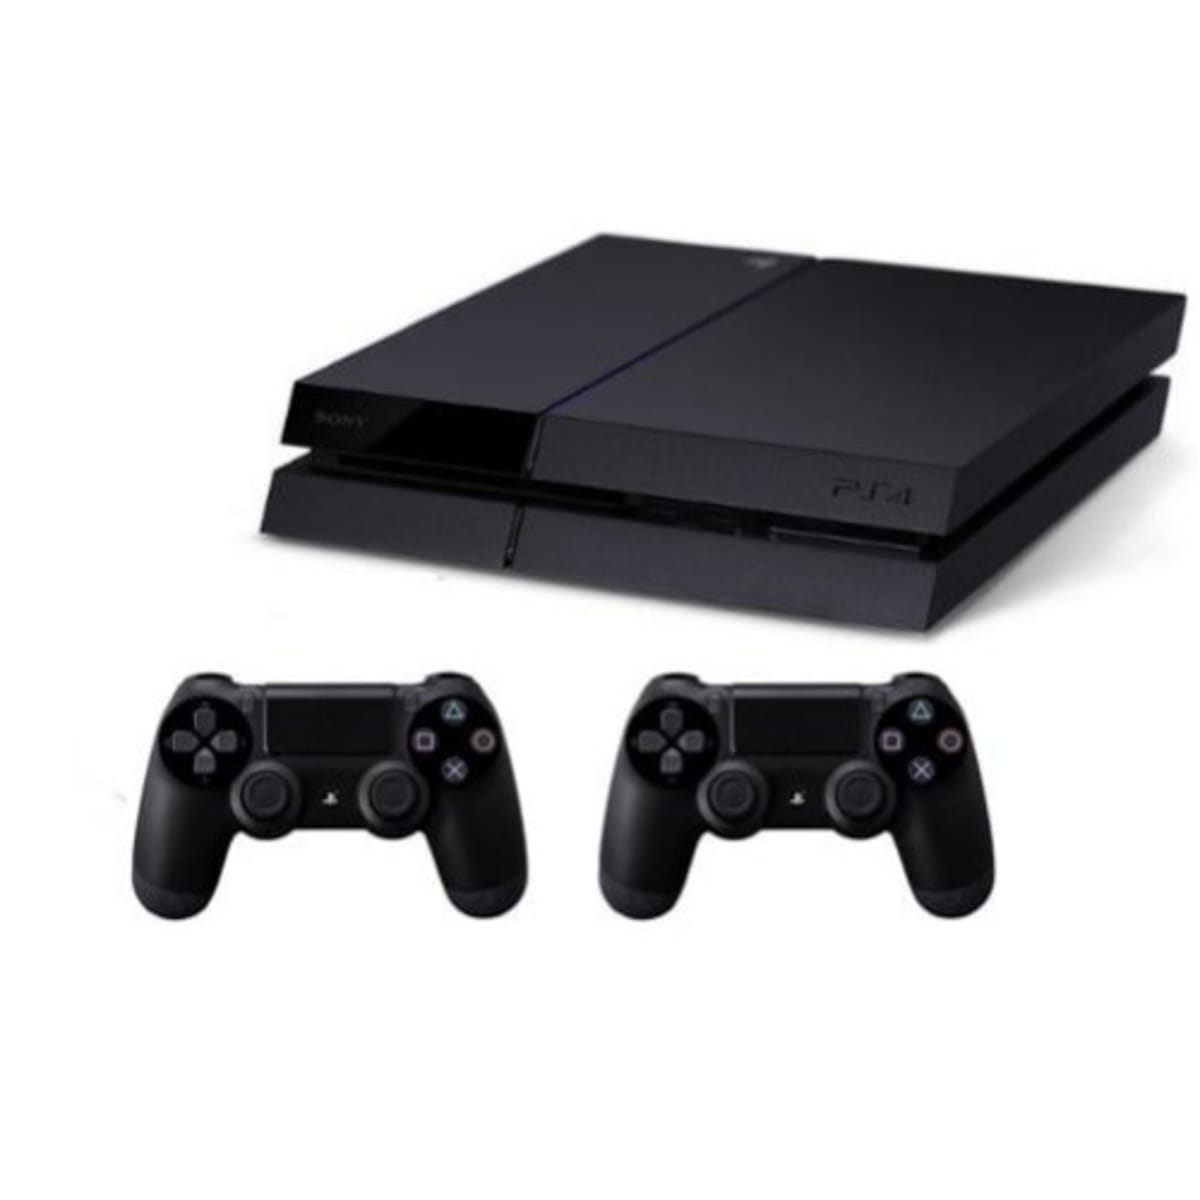 Sony PlayStation 4 500GB Console (Black) : 1: : PC & Video Games